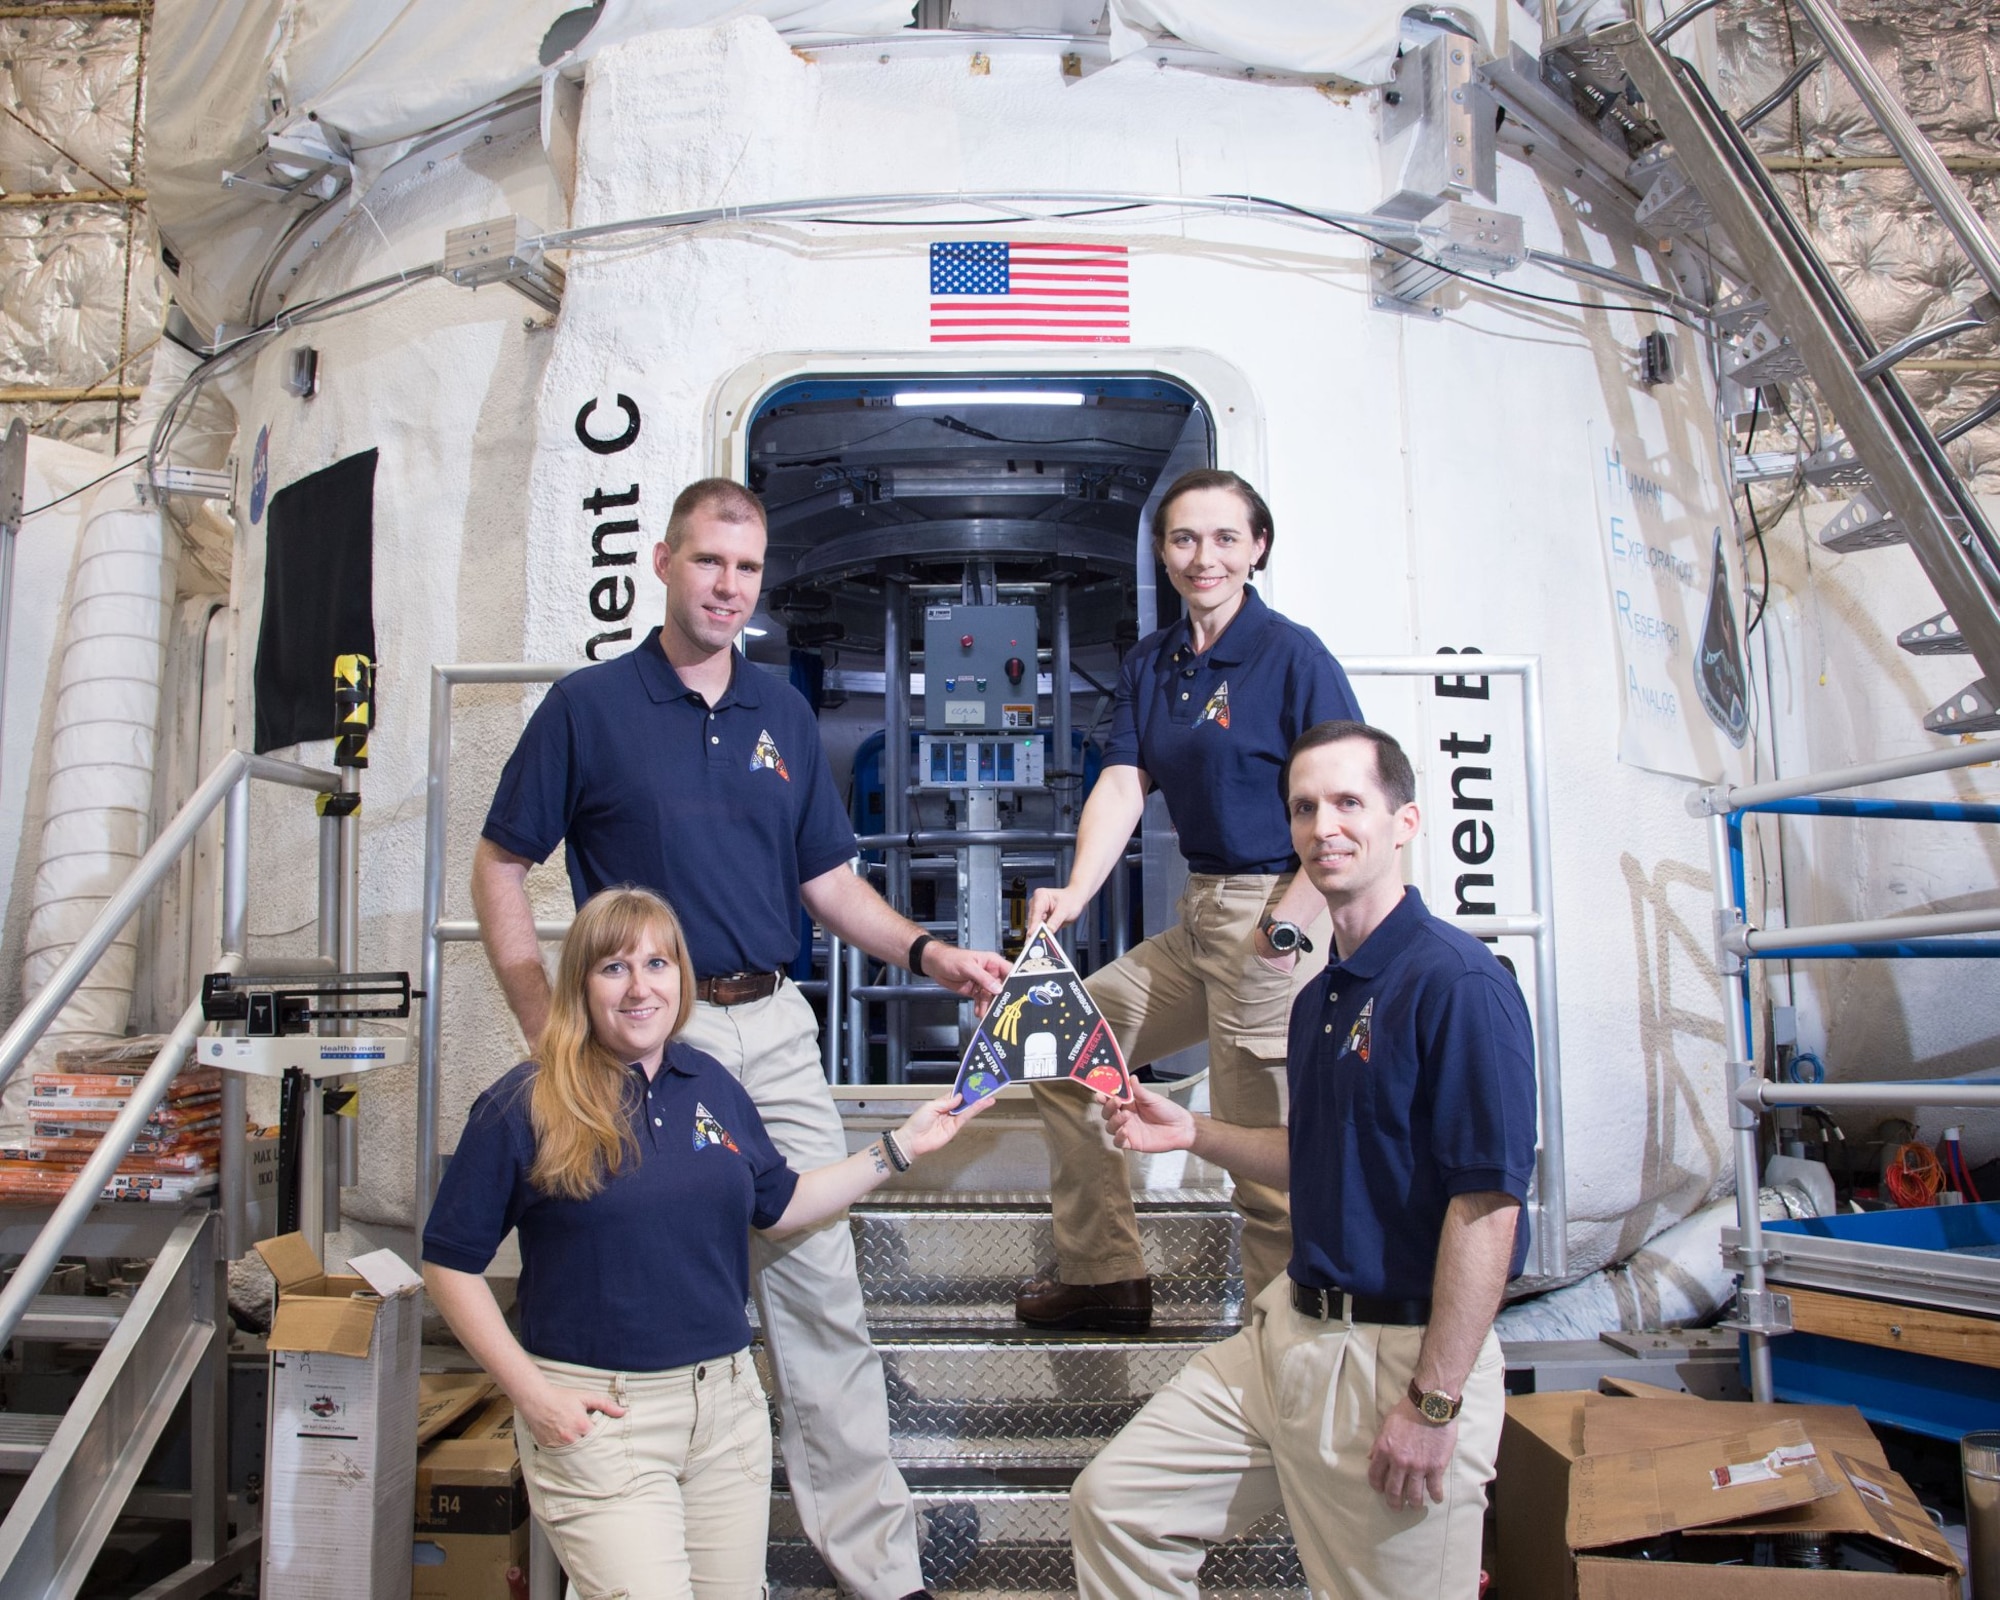 Four people stand in blue polo shirts and khaki pants. Two are standing in each row, all in front of a space craft vessel.